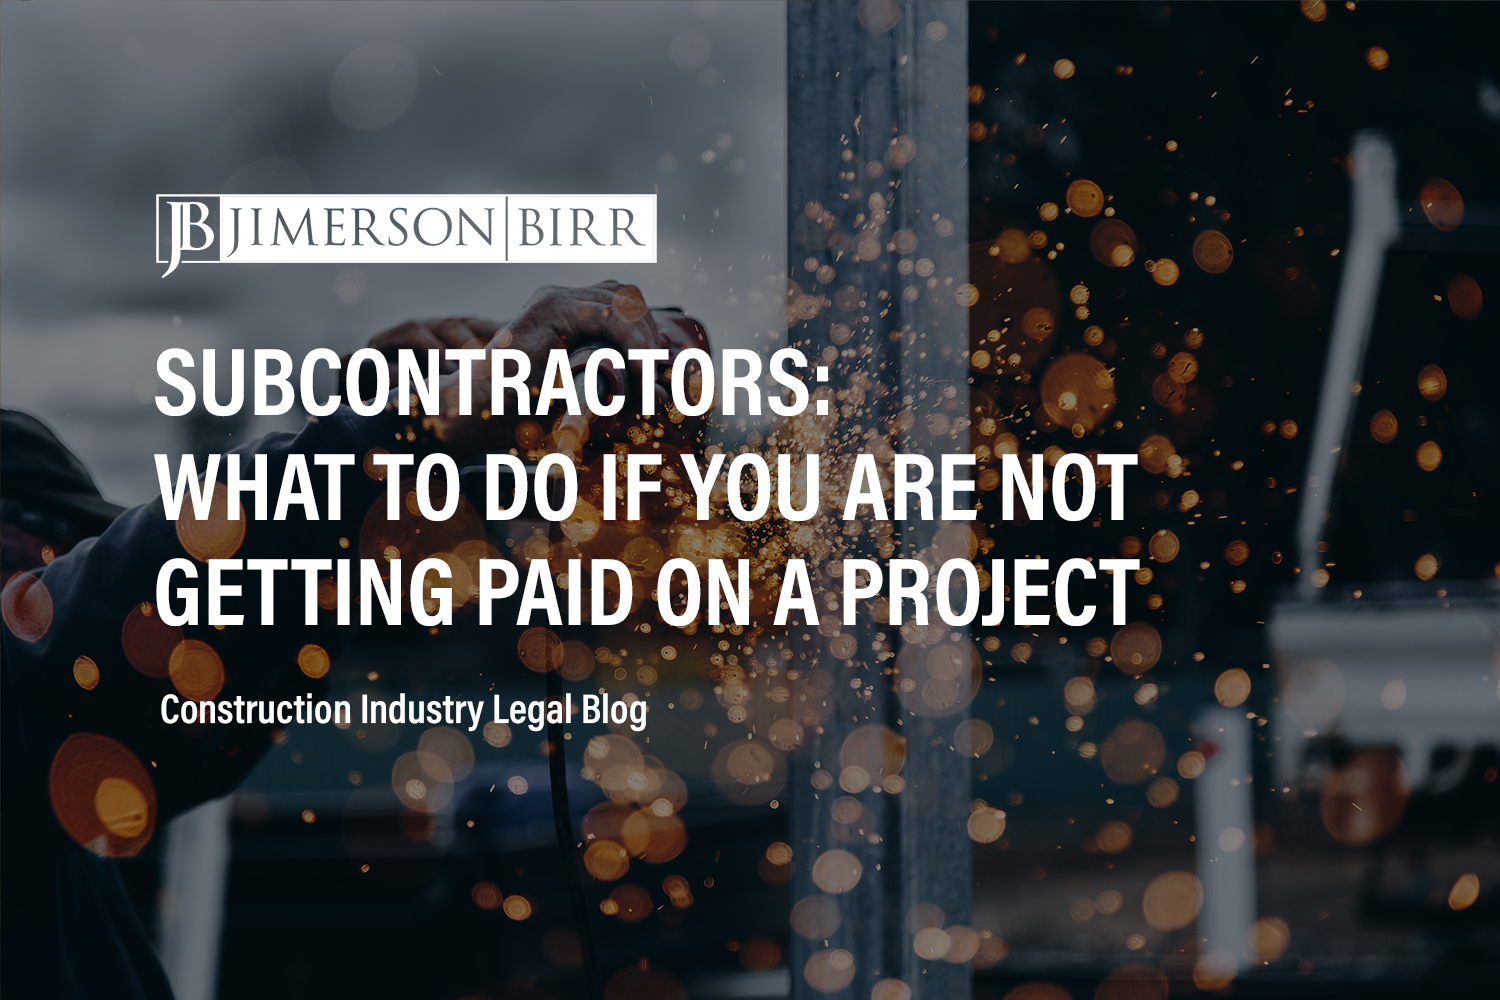 Subcontractors: What to Do If You Are Not Getting Paid On a Construction Project